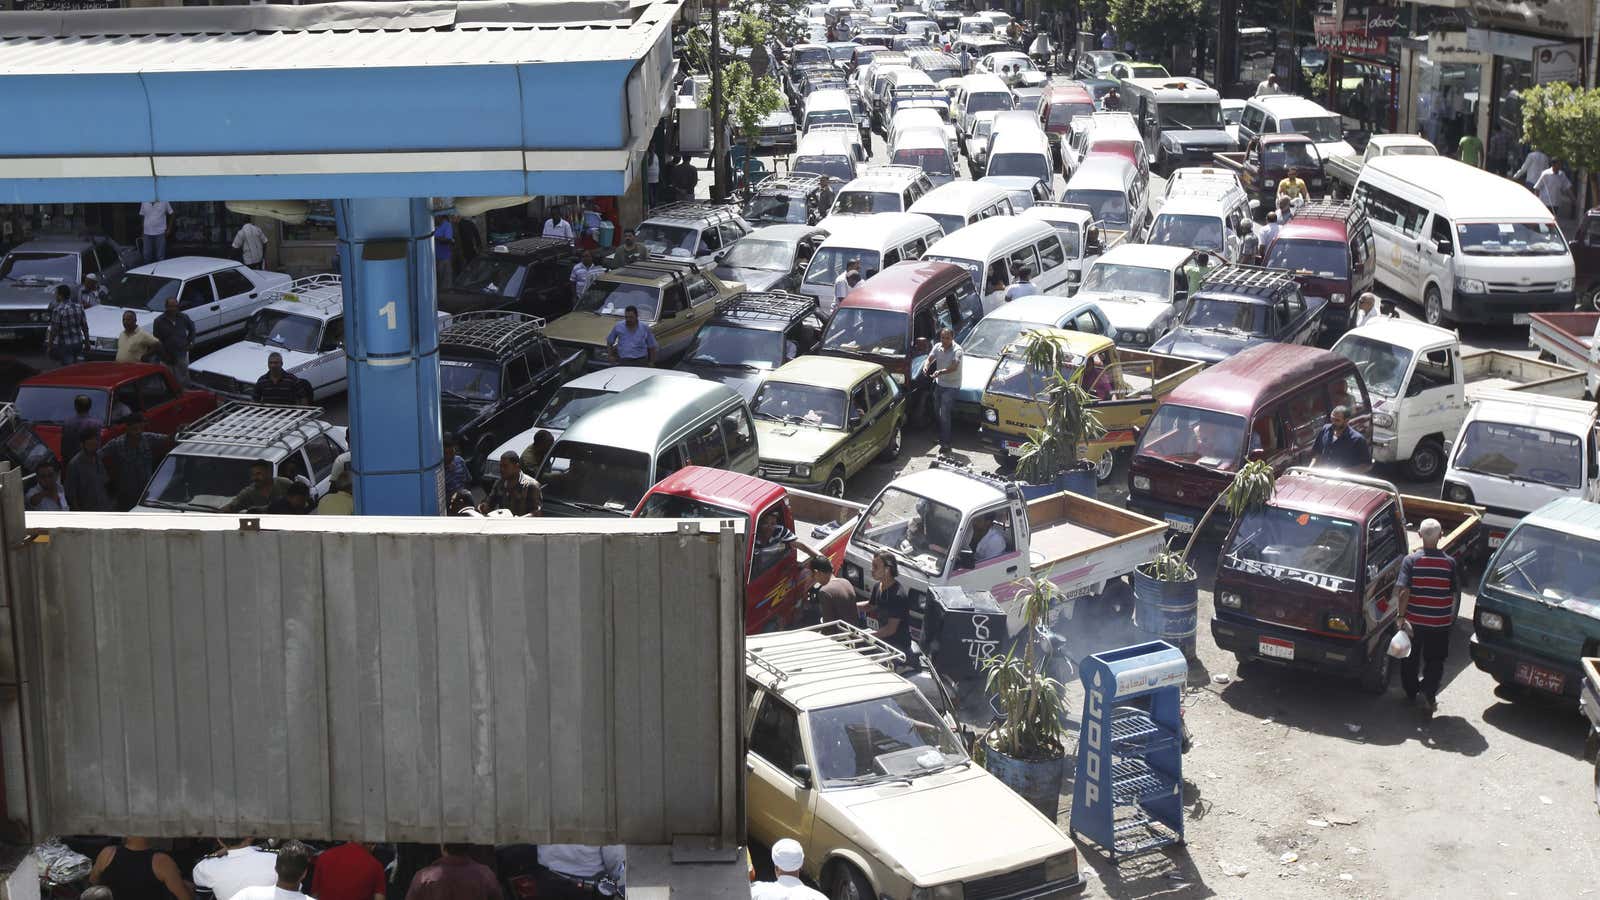 Vehicles queue at a petrol station during a fuel shortage in Cairo in 2013. The same is happening now.